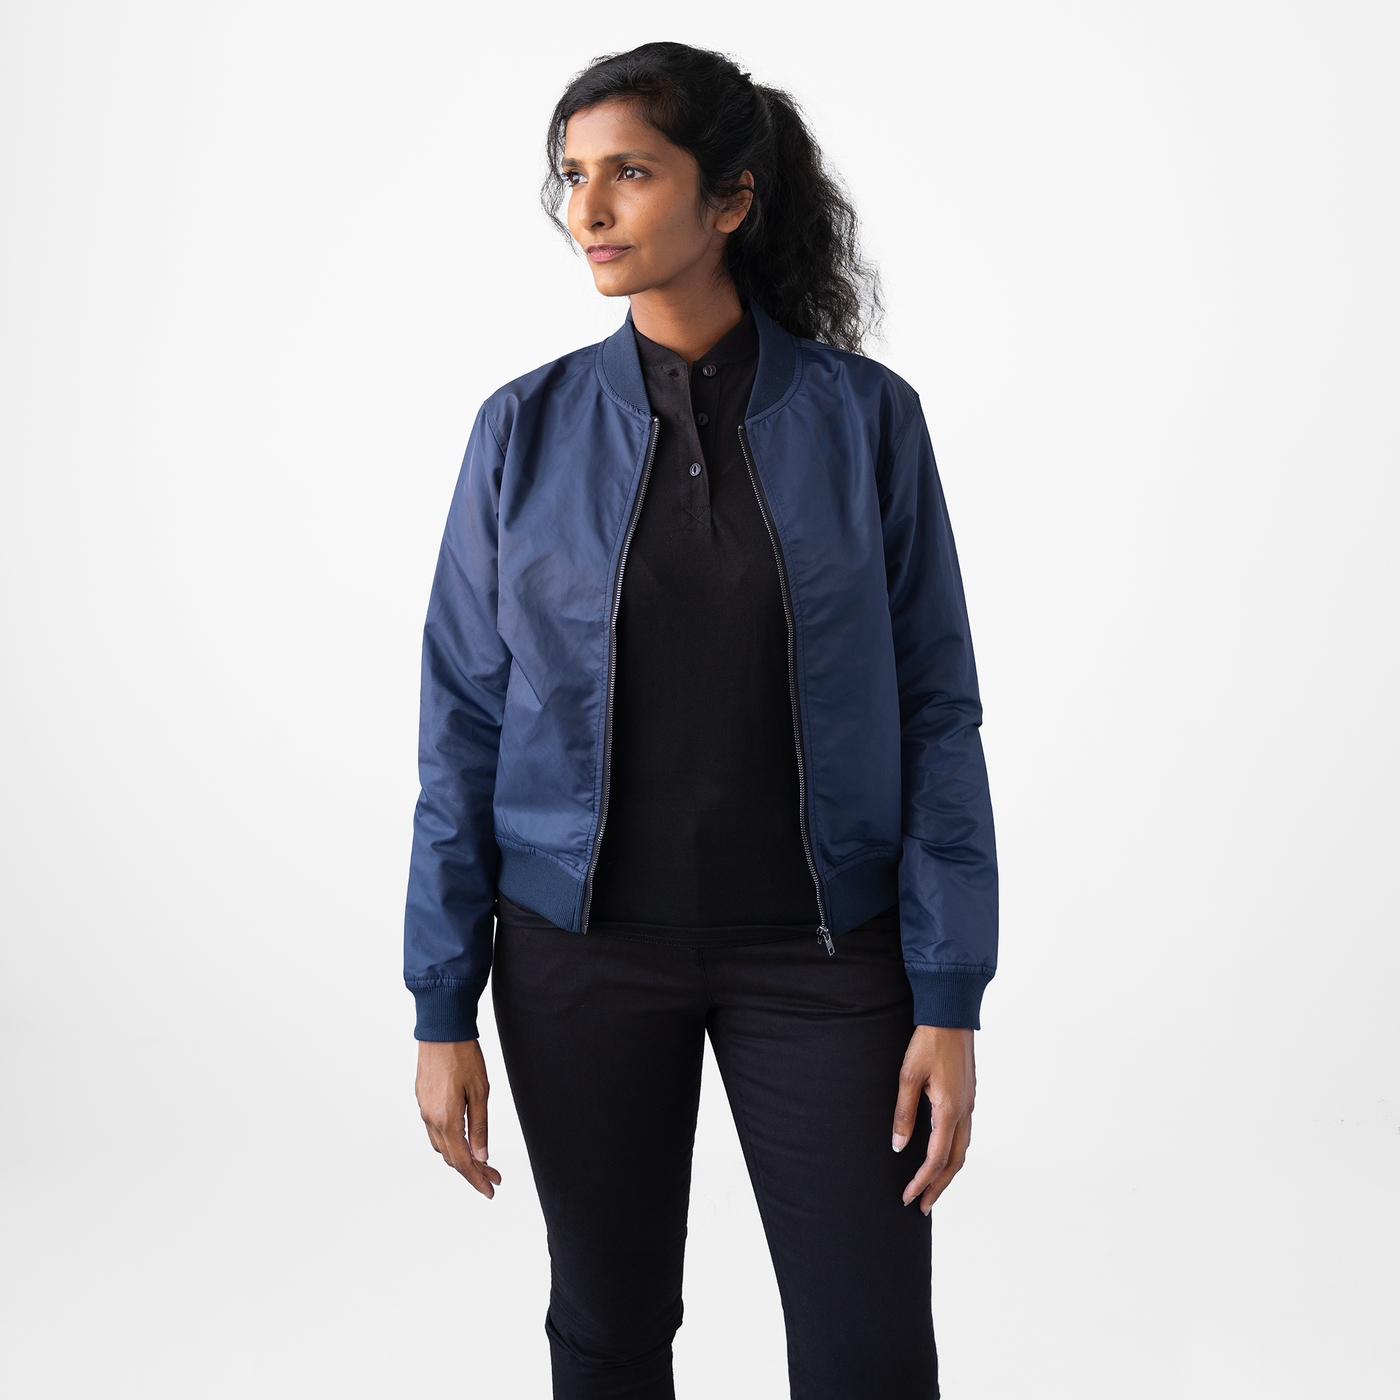 Women's Navy Bomber Jacket - A Classic Layering Piece